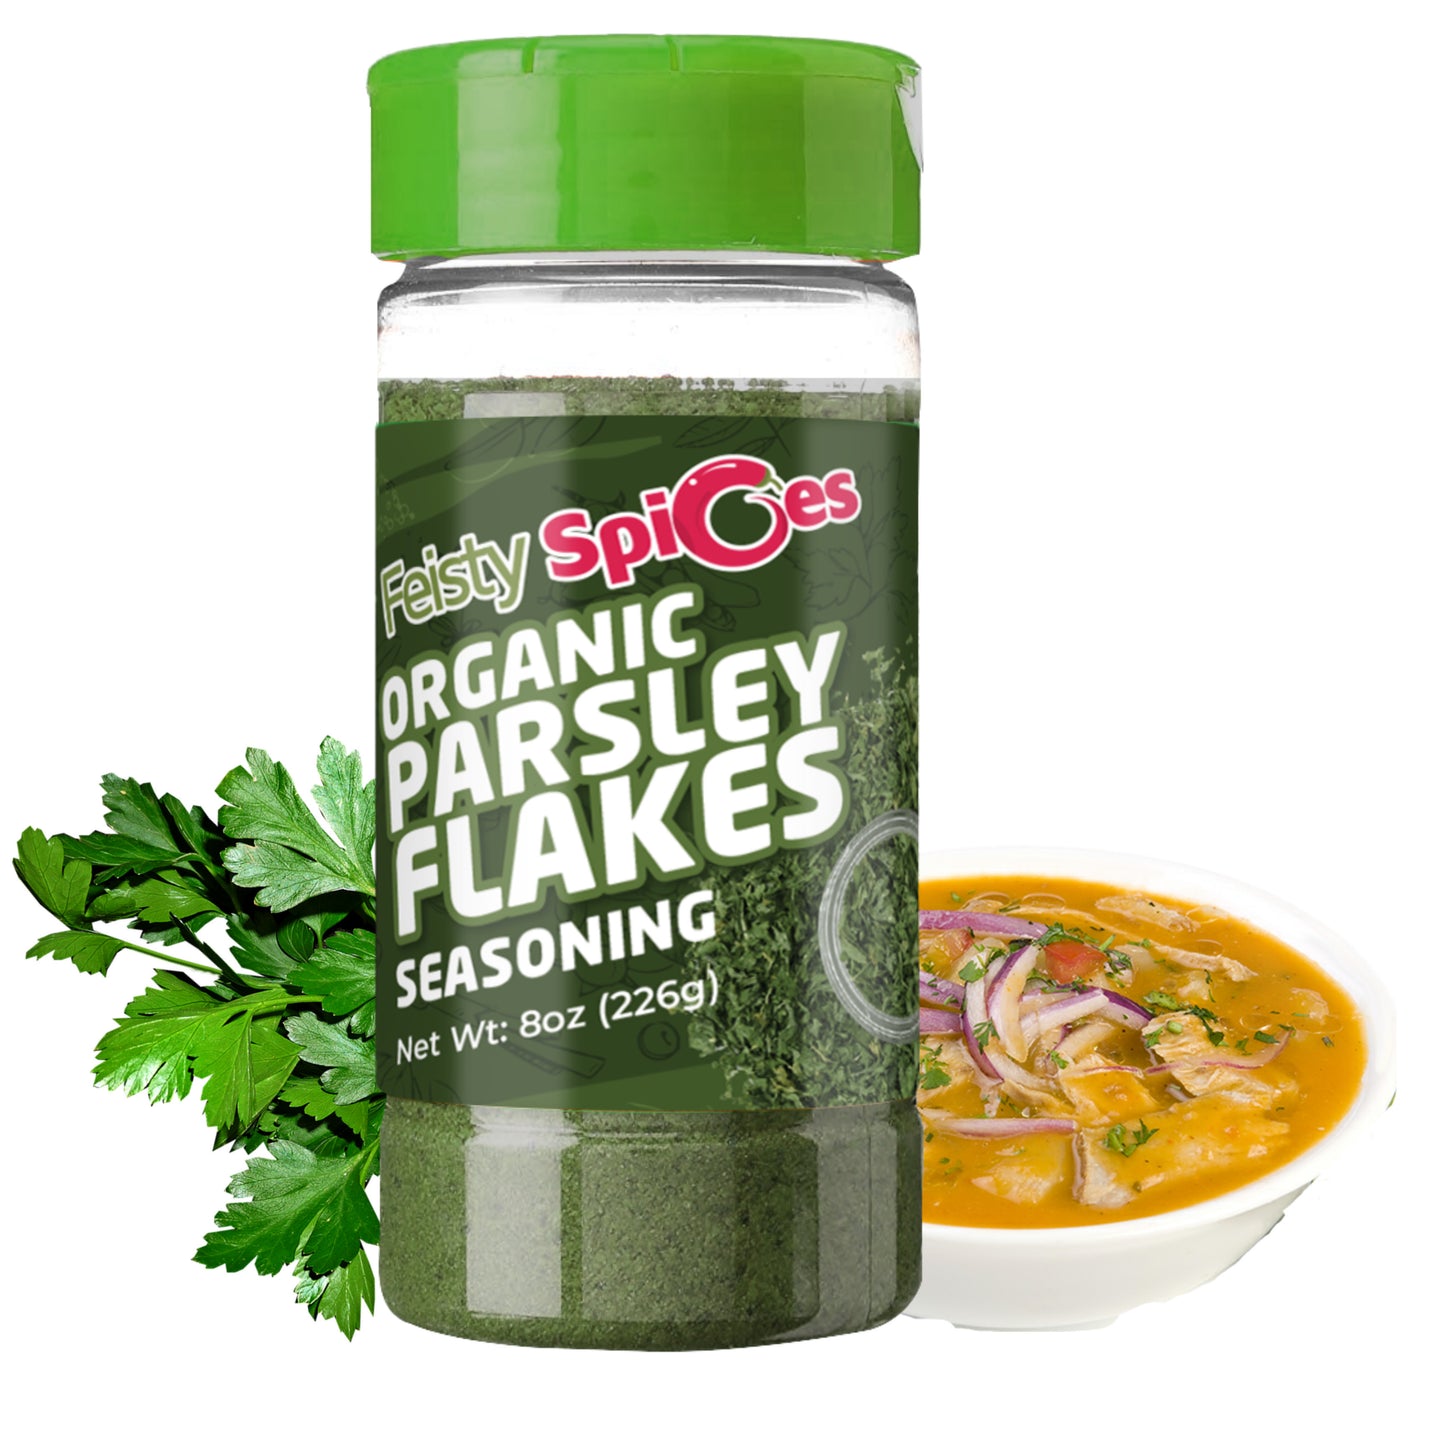 Feisty Spices Organic Parsley Flakes